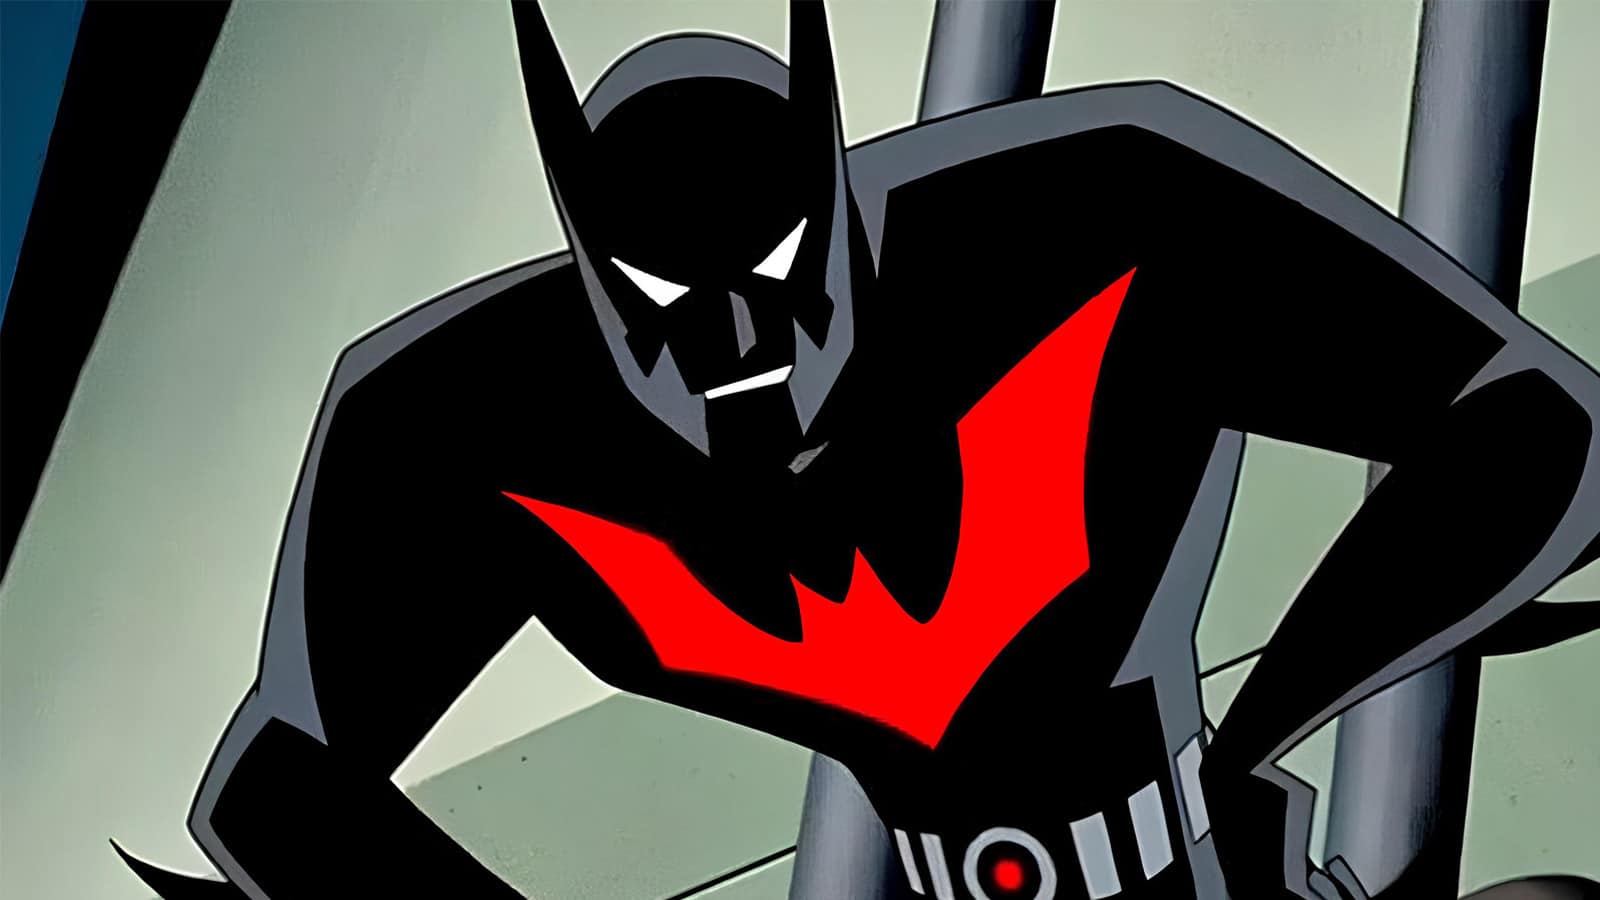 This Batman Beyond Movie Concept Art Gives Spider-Verse Vibes 8